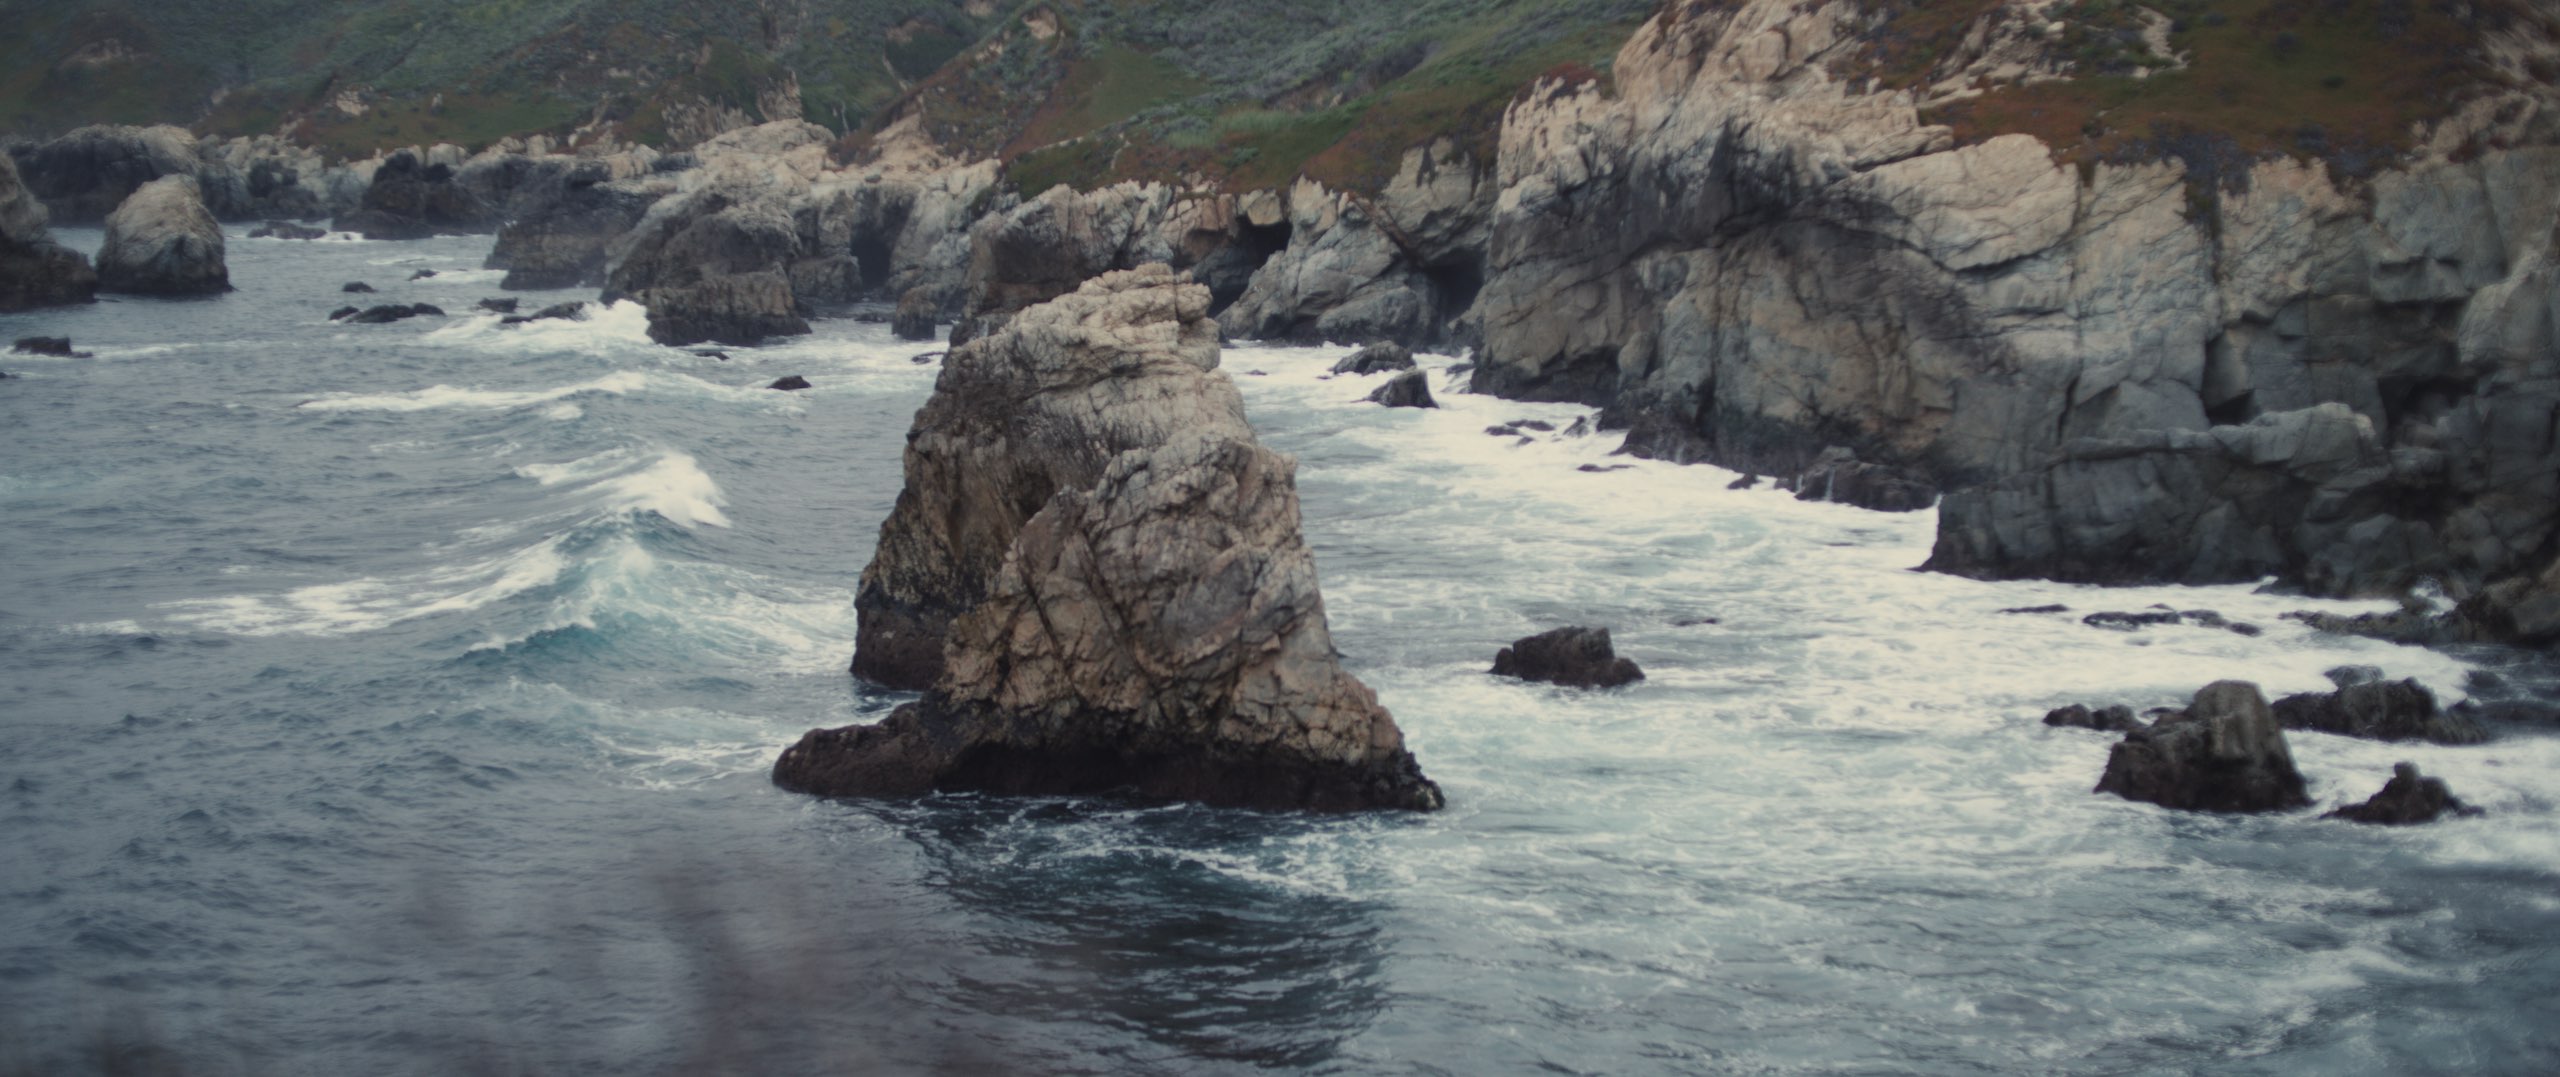 The Dailies Season 2 Episode 3 Komuso Big Sur with view of a large rocky outcrop in the water with cliffs nearby